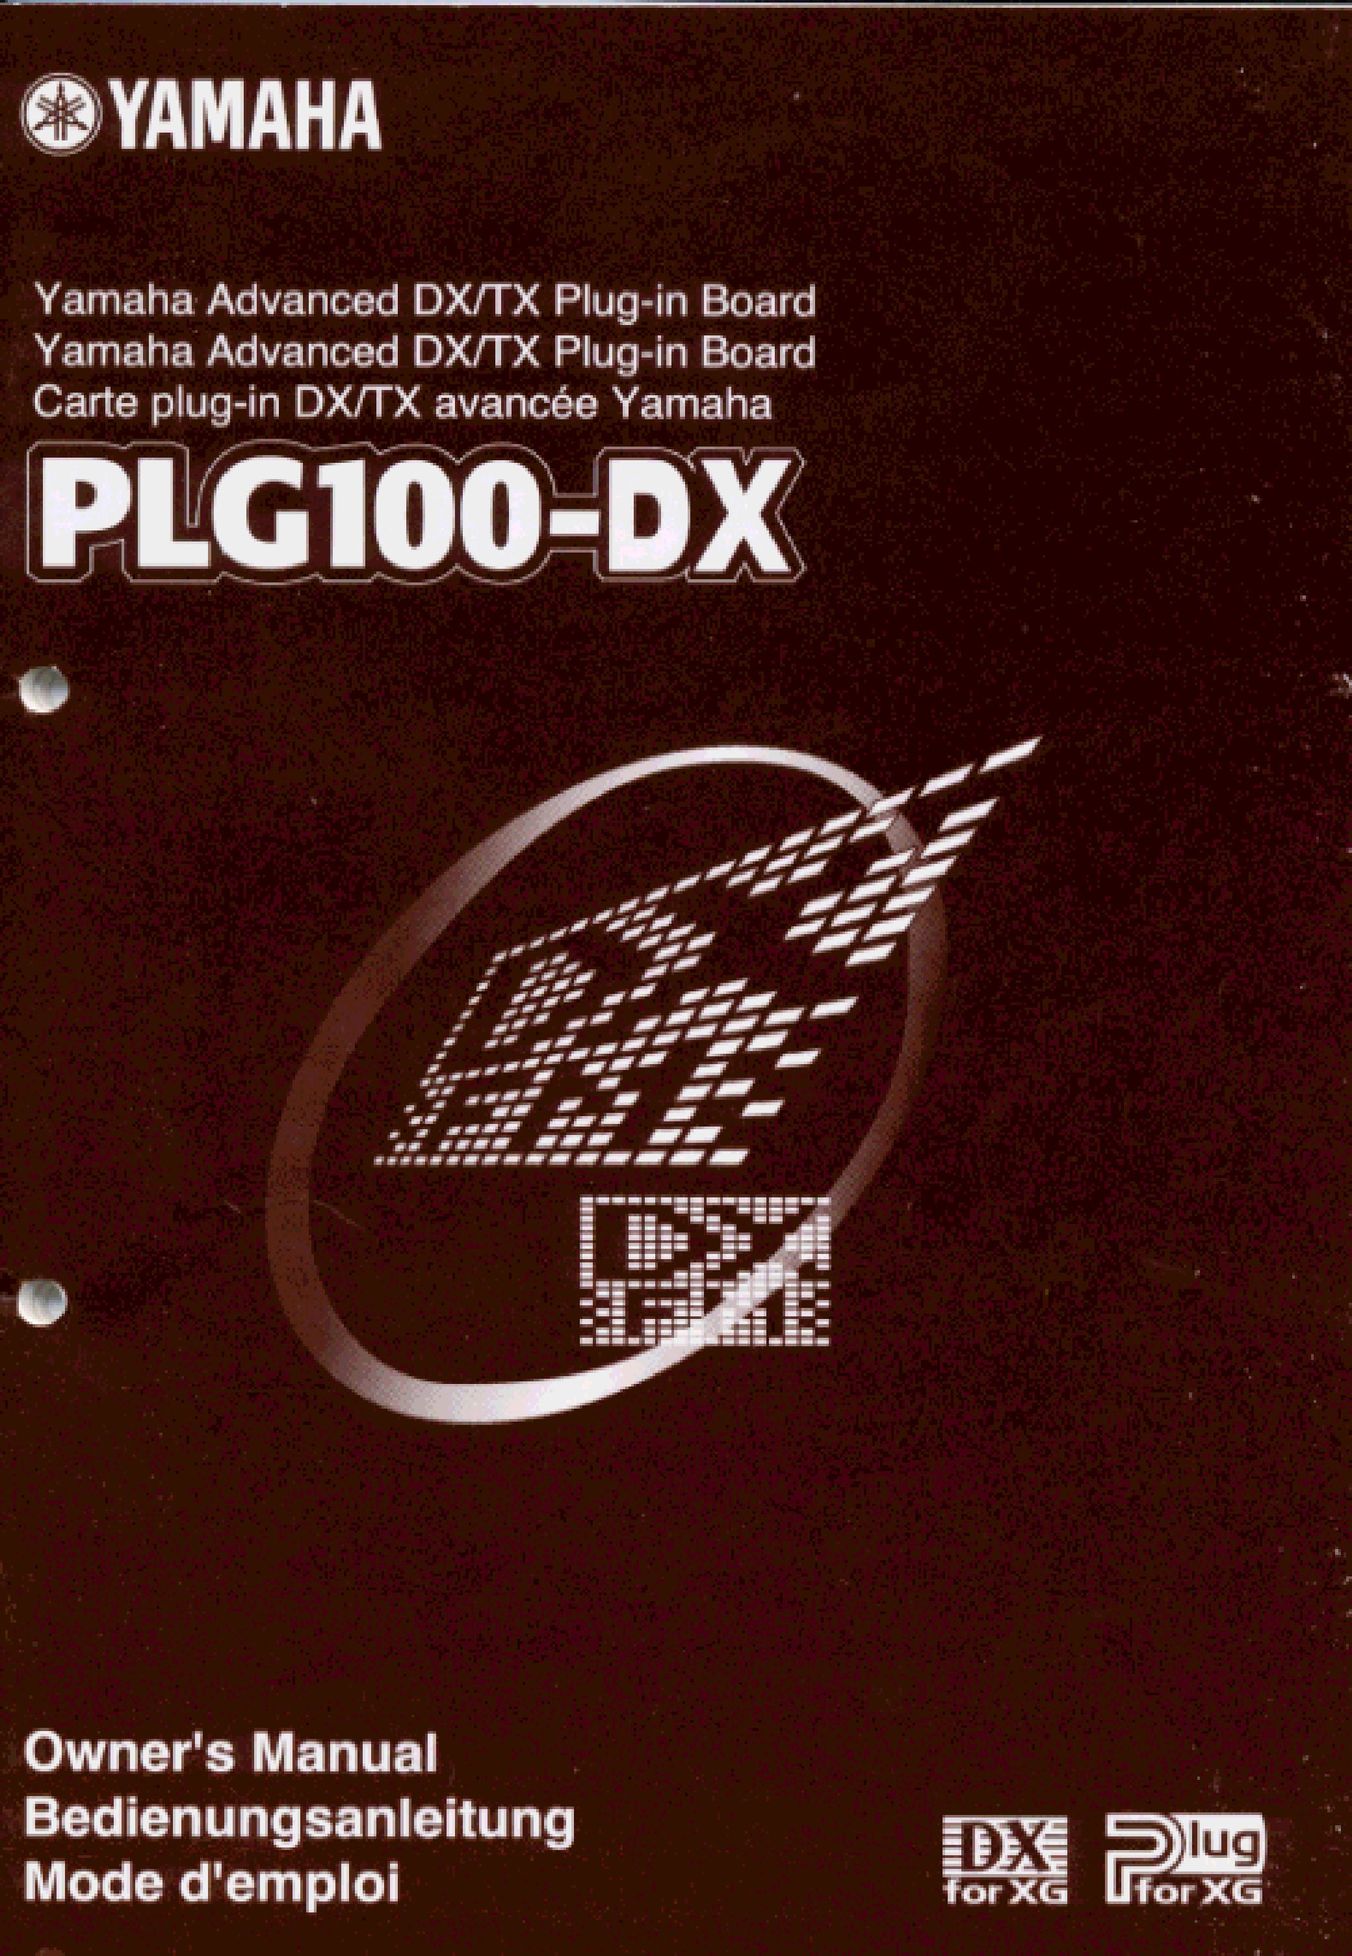 Yamaha PLG100-DX Home Theater Server User Manual (Page 1)